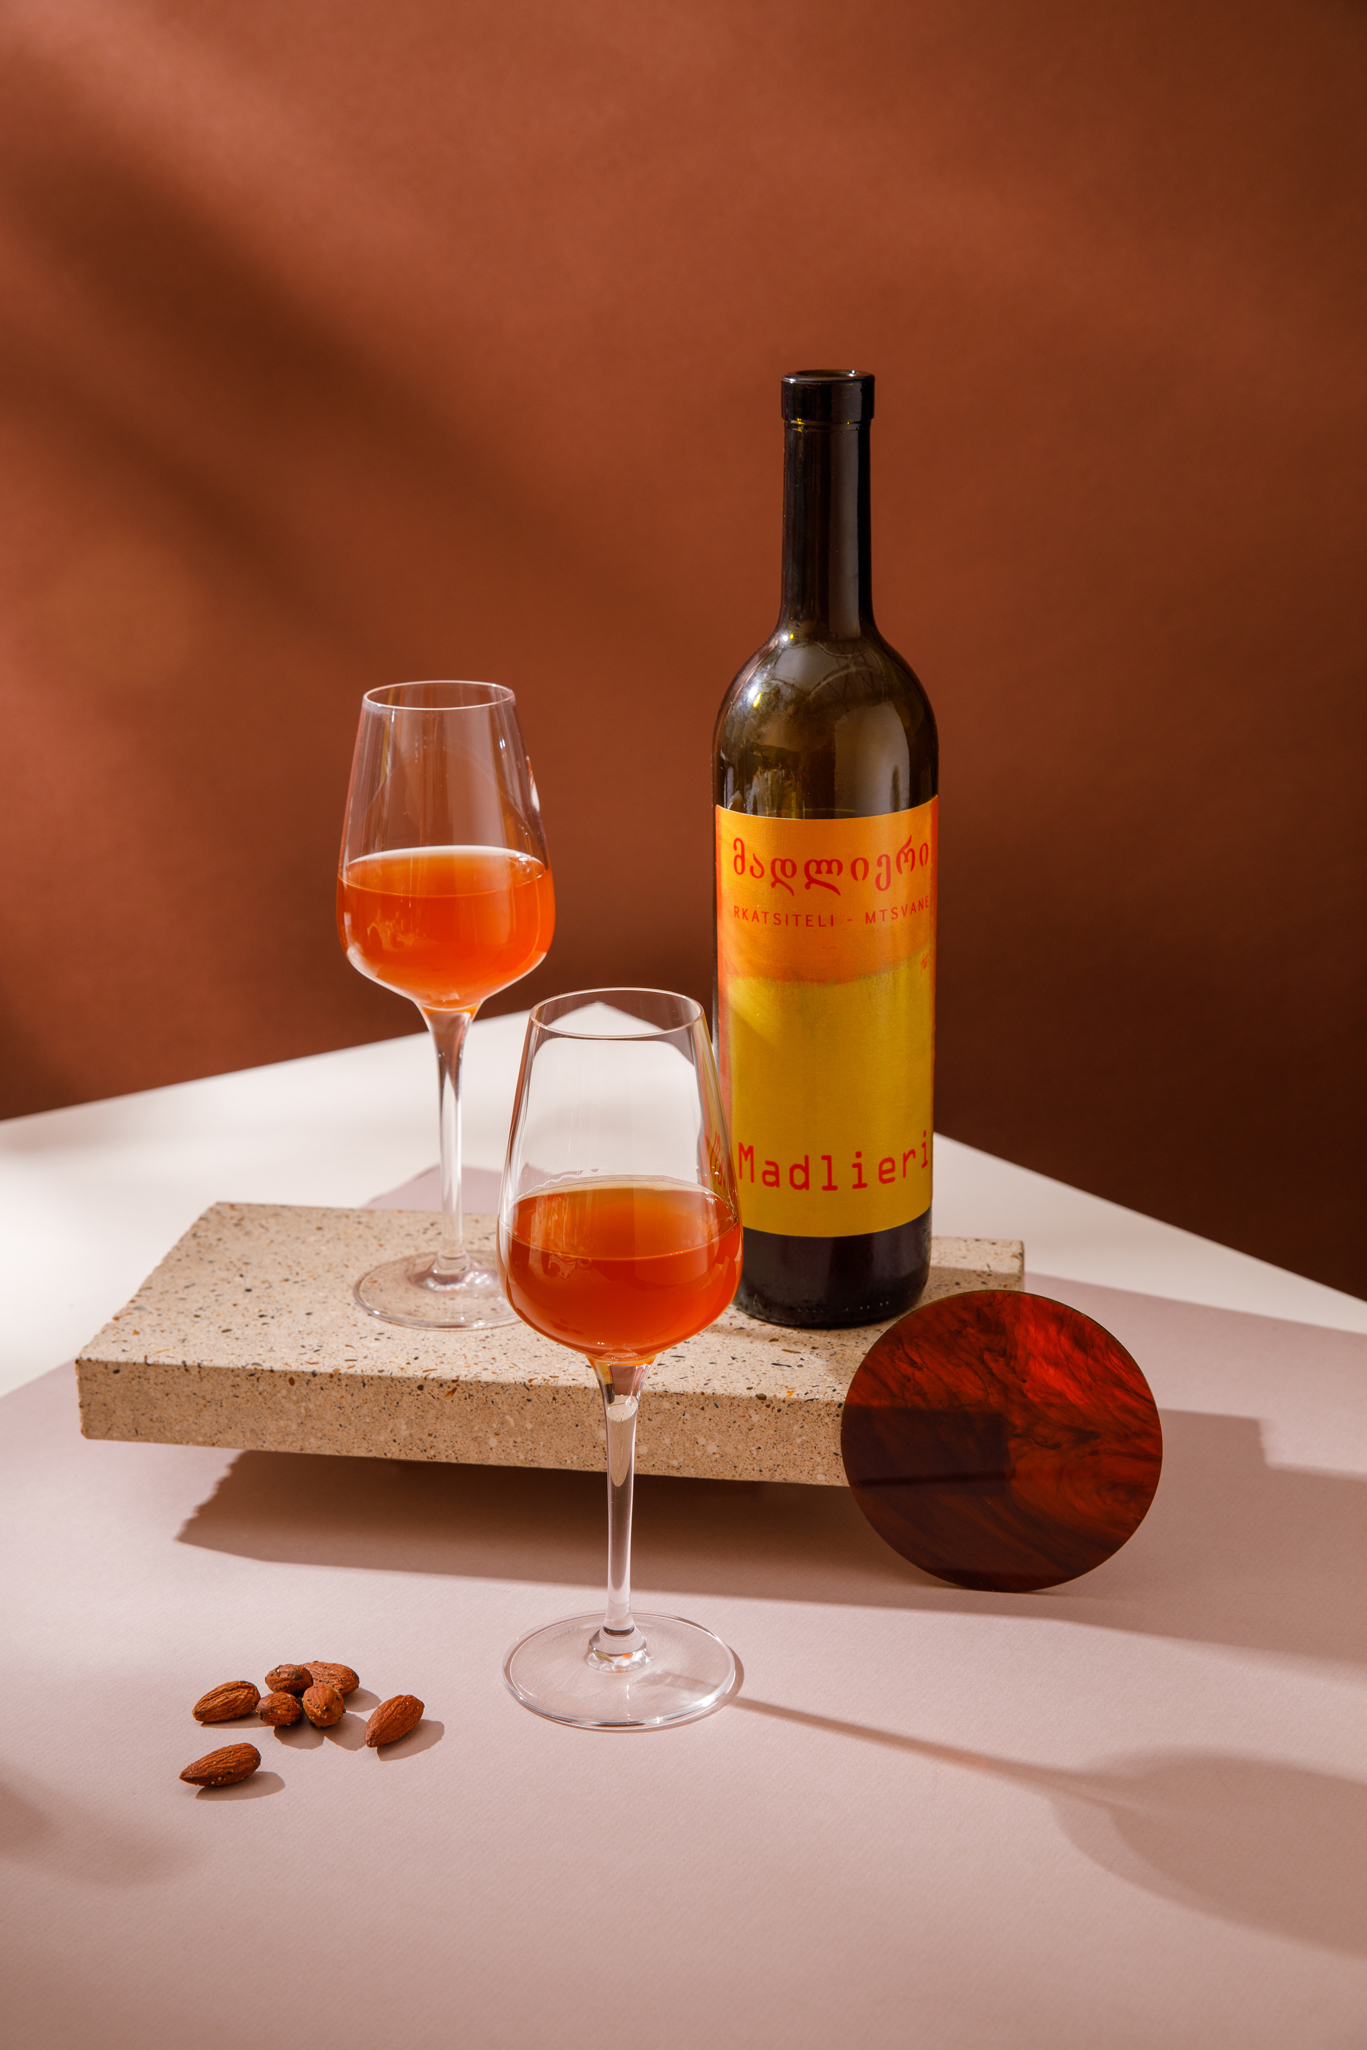 photograph of a bottle of orange with with two glasses of orange wine next to it. One glass and the bottle stand on a small concrete plinth, background is chestnut brown